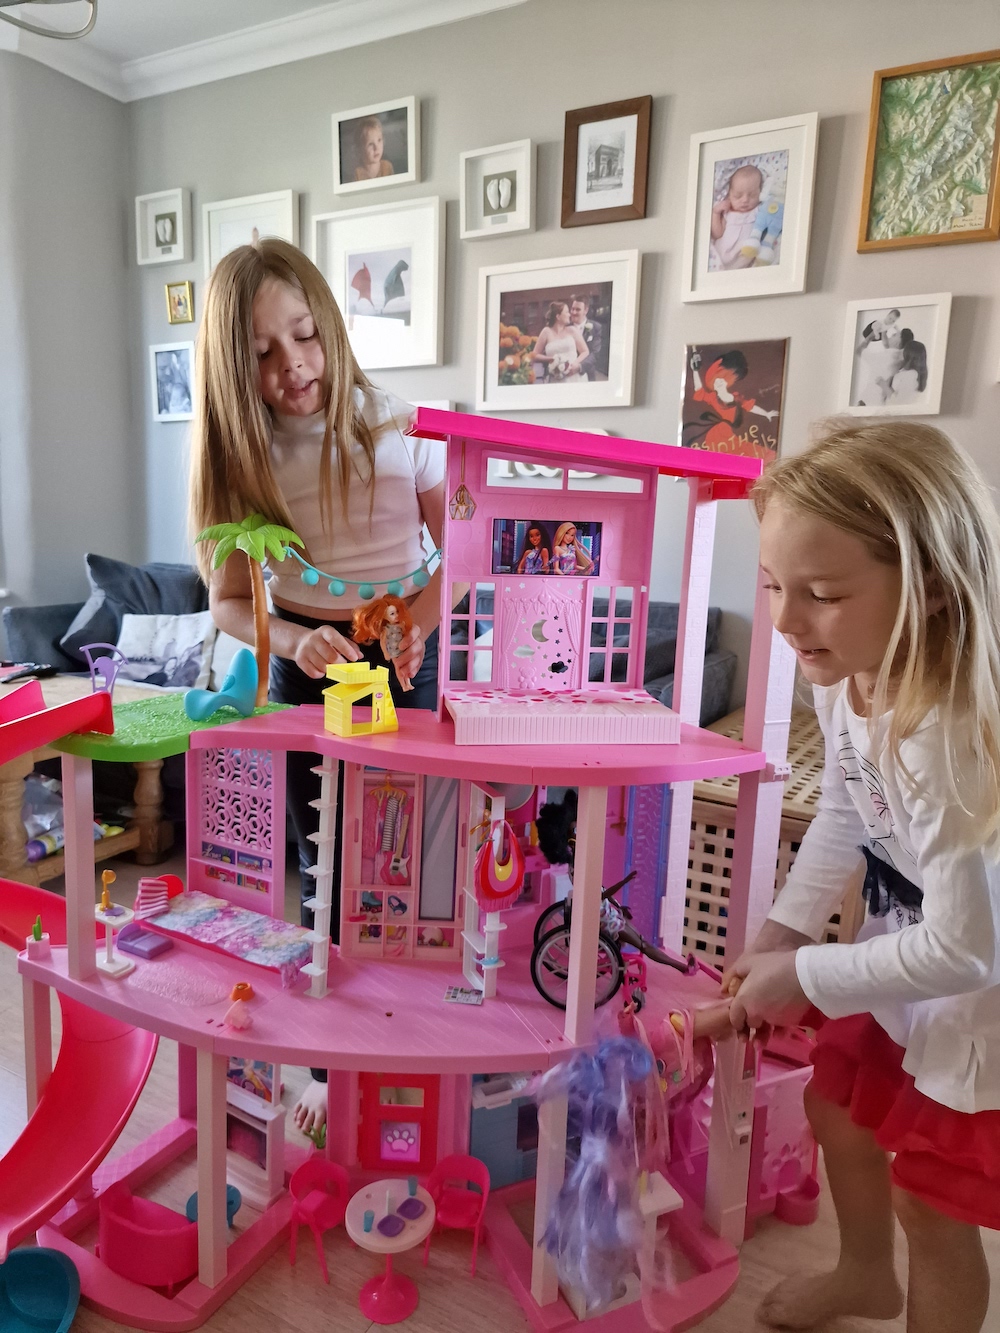 What my children are learning through playing with the new diverse Barbies